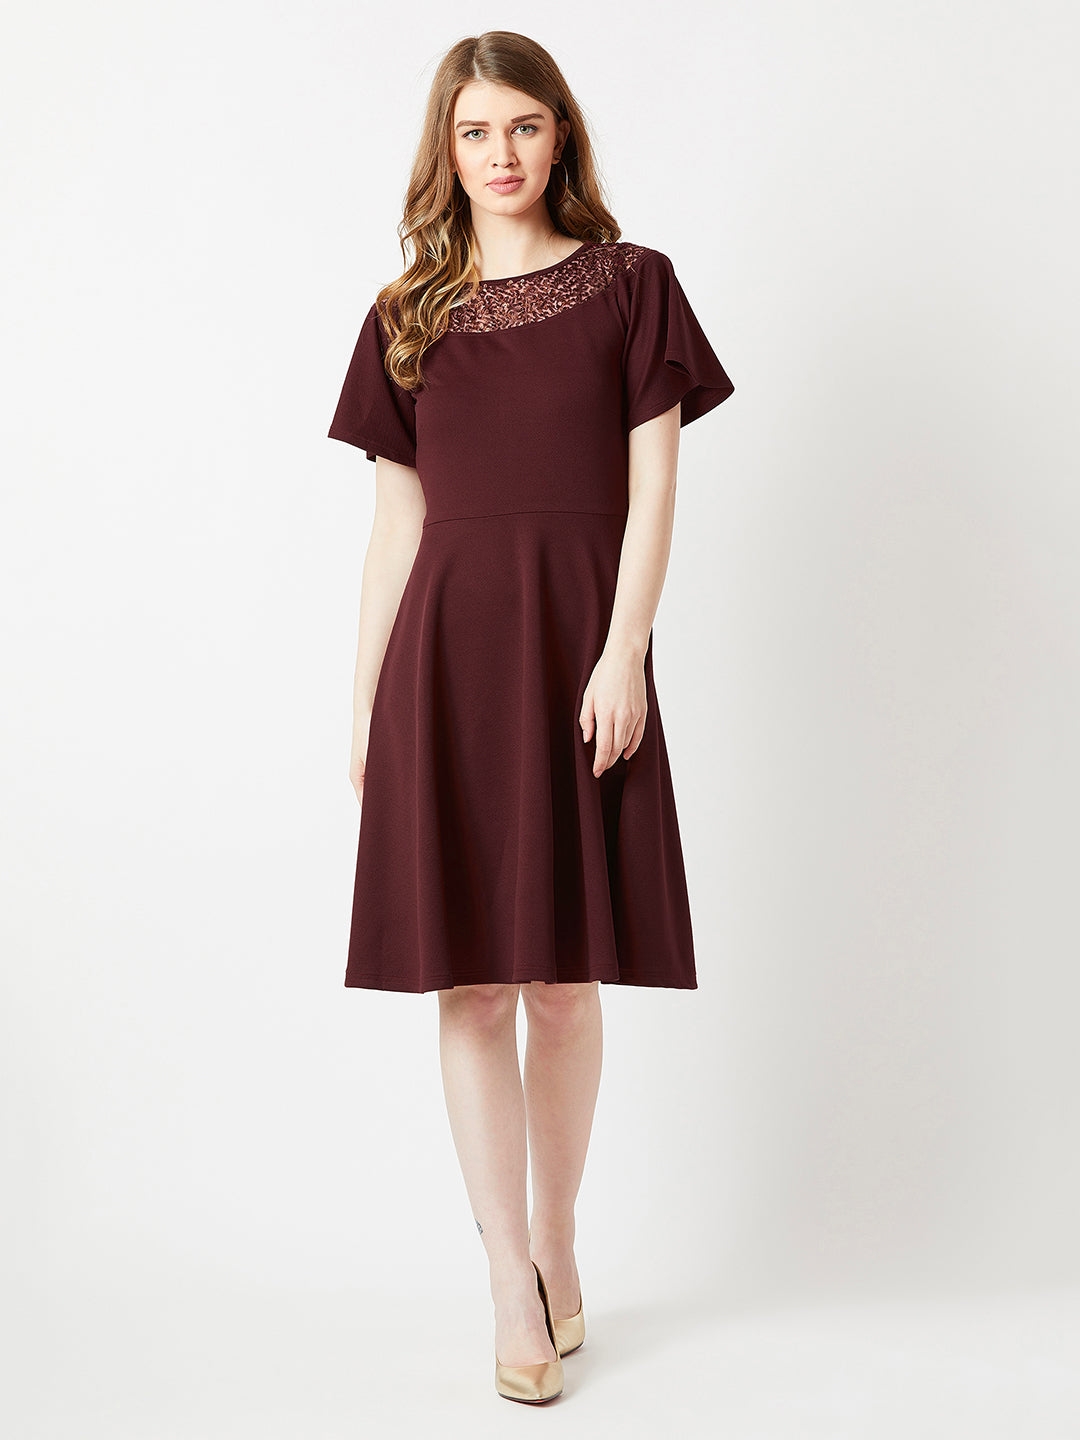 MISS CHASE | Wine Red Round Neck Flared Short Sleeve Solid Skater Knee-Long Lace Dress